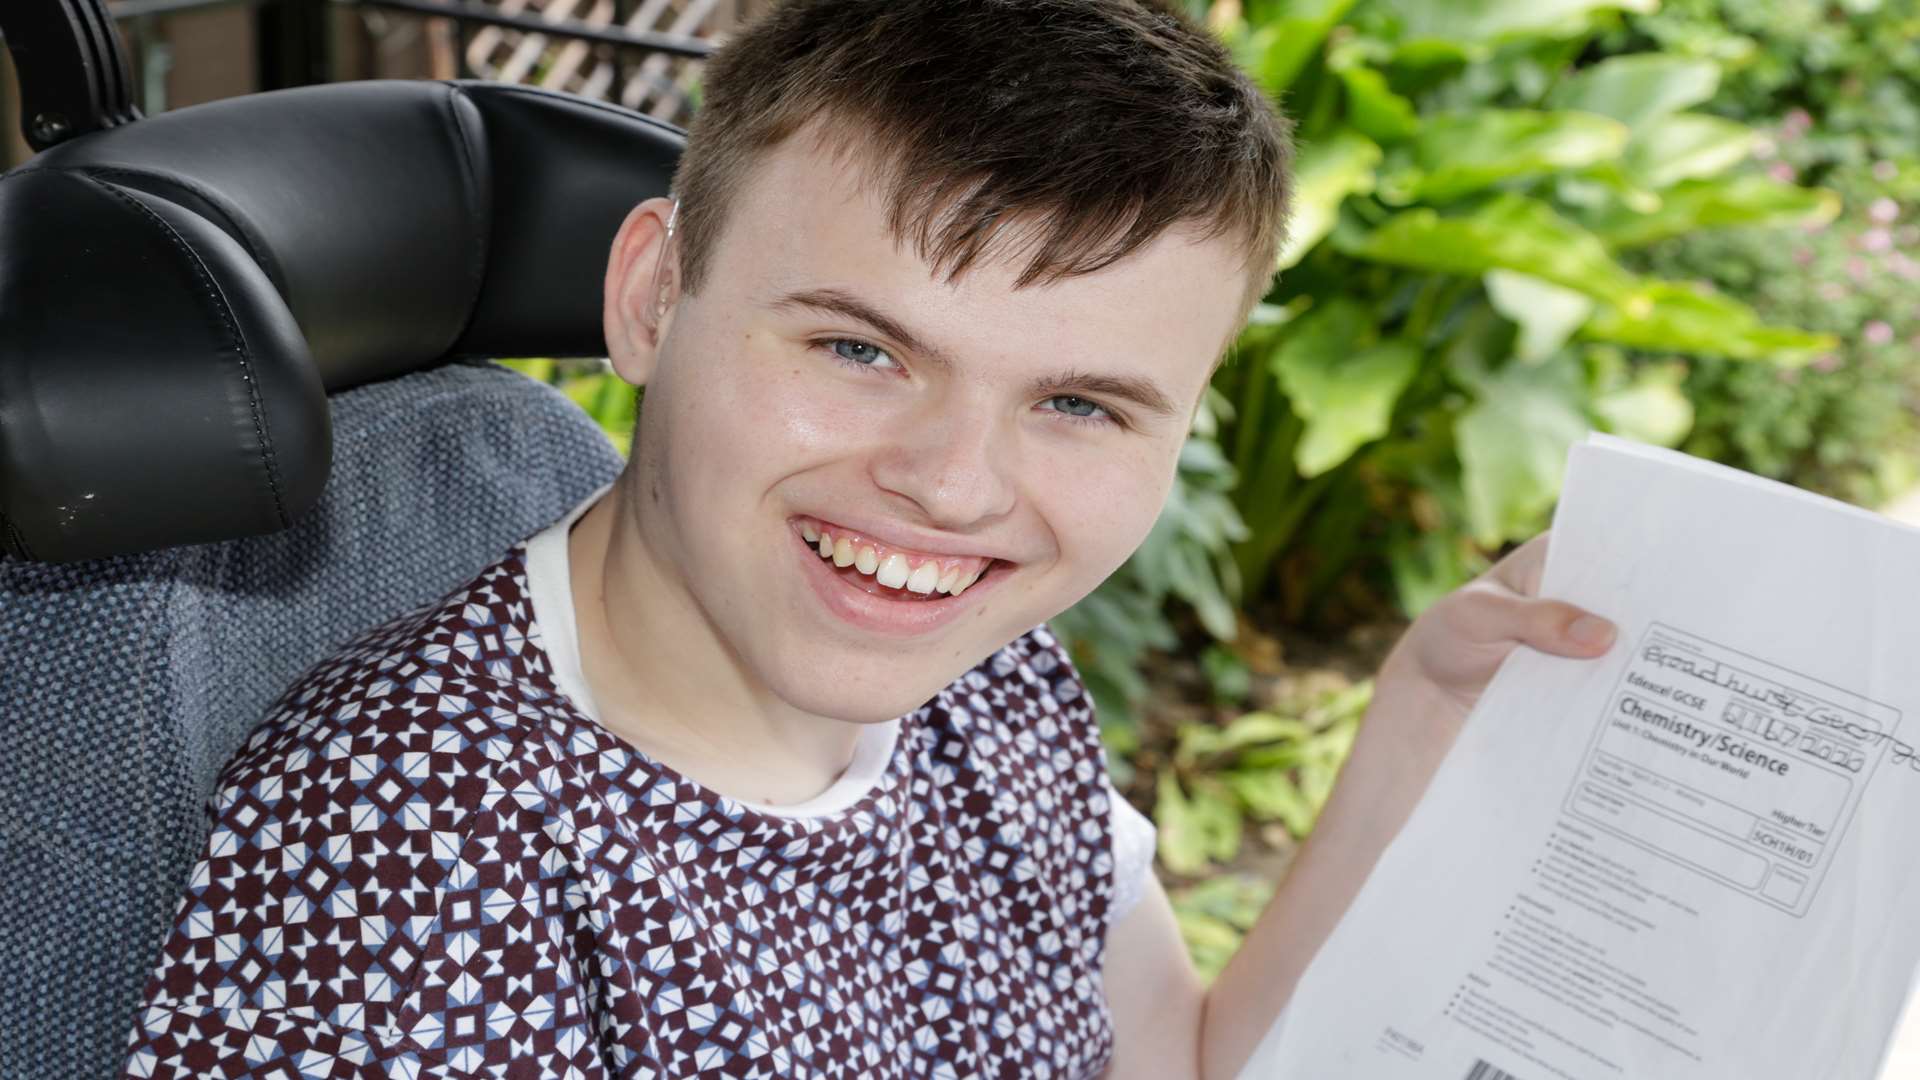 George Broadhurst, who was born premature at 27 weeks, has overcome many challenges and taken his qualification in statistical maths and core science a year early.